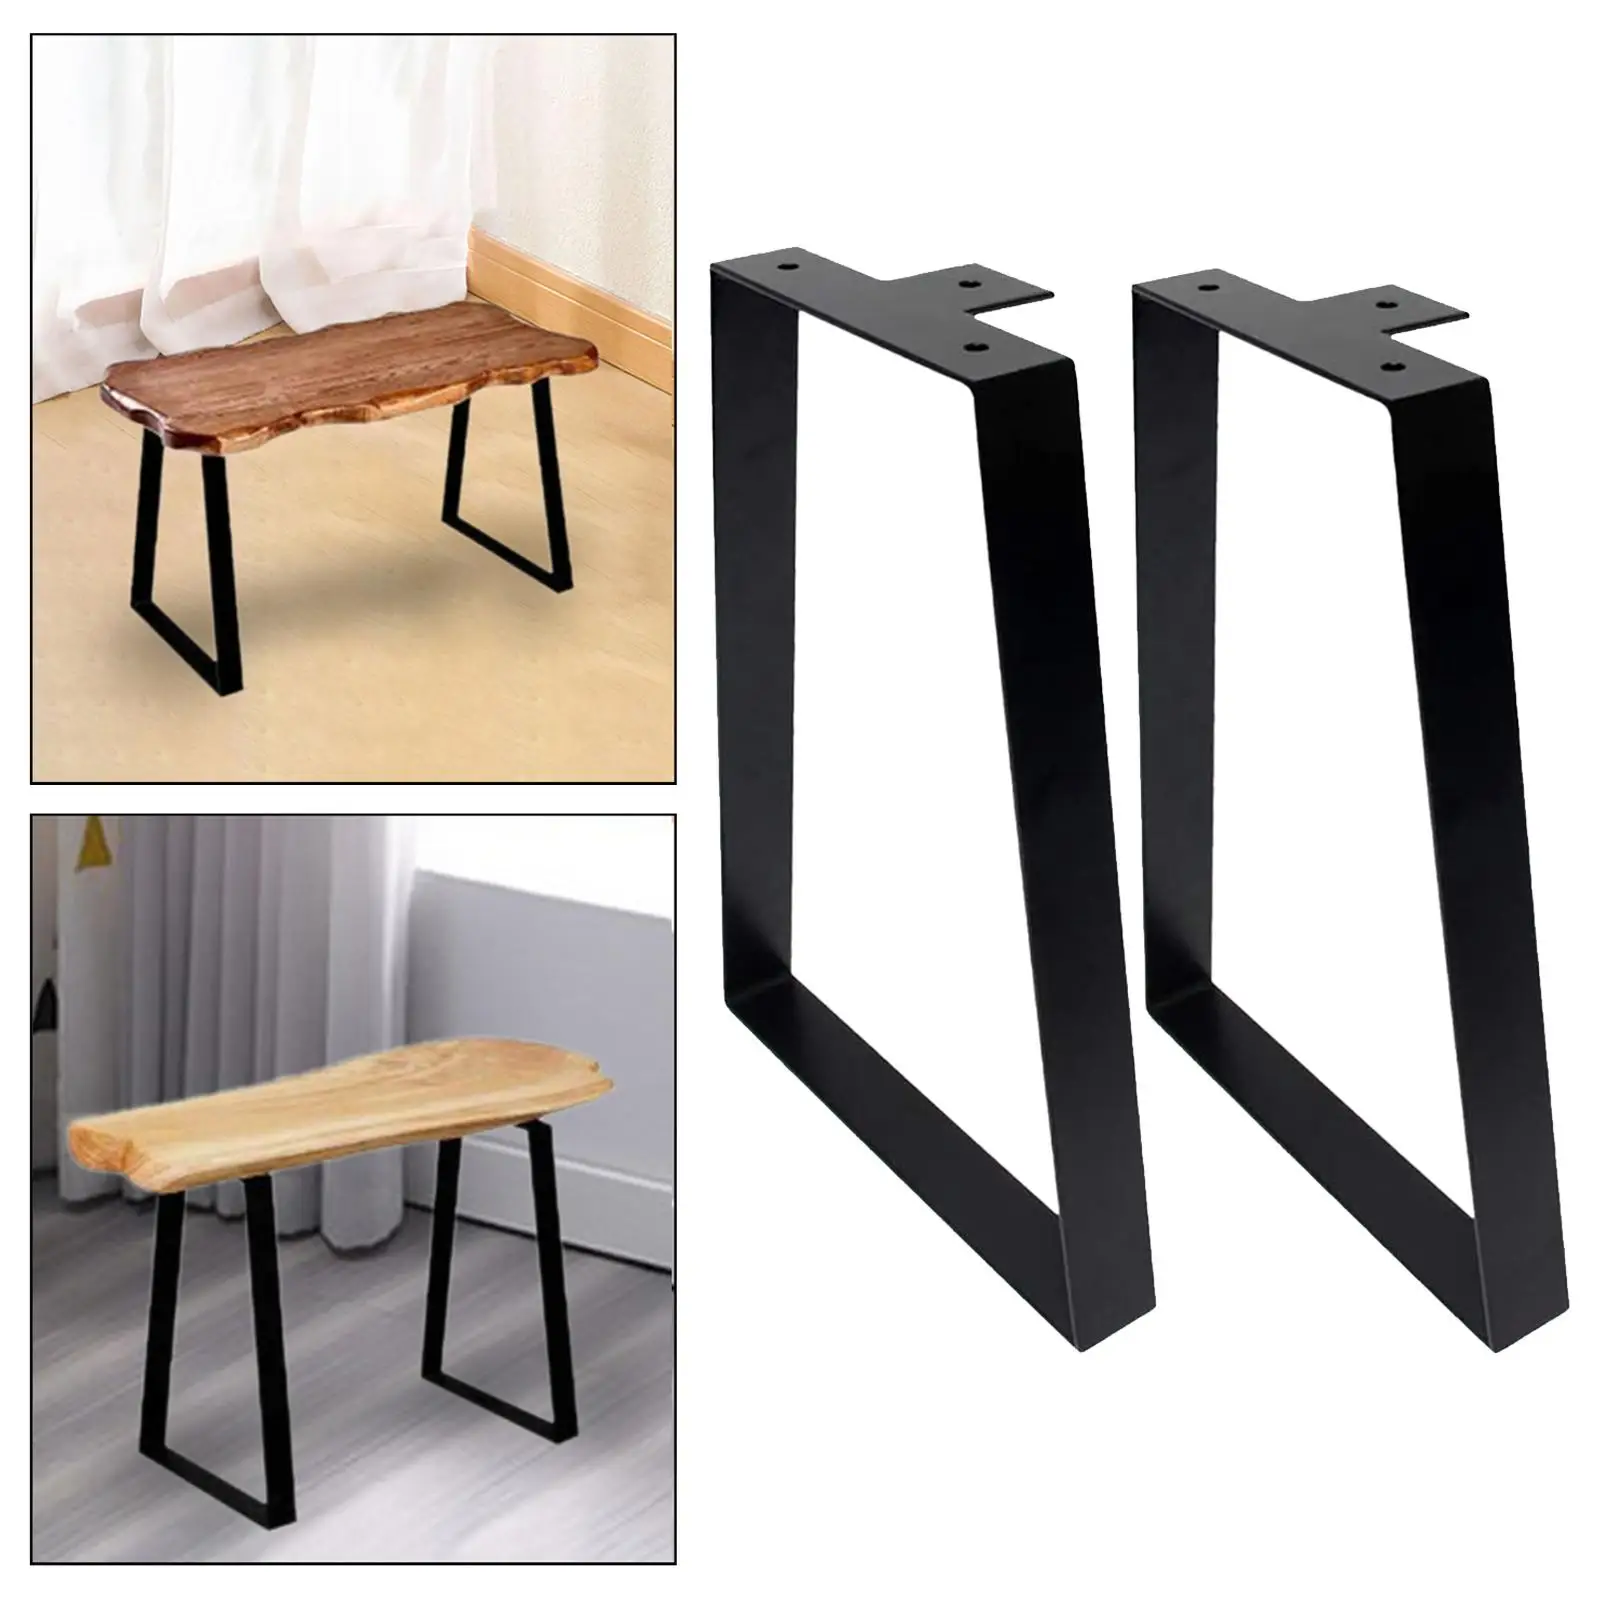 2Pcs Trapezoid Table Legs Furniture Legs Desk Legs DIY Home Modern Dining Table Legs for Coffee Tables Office Night Stands